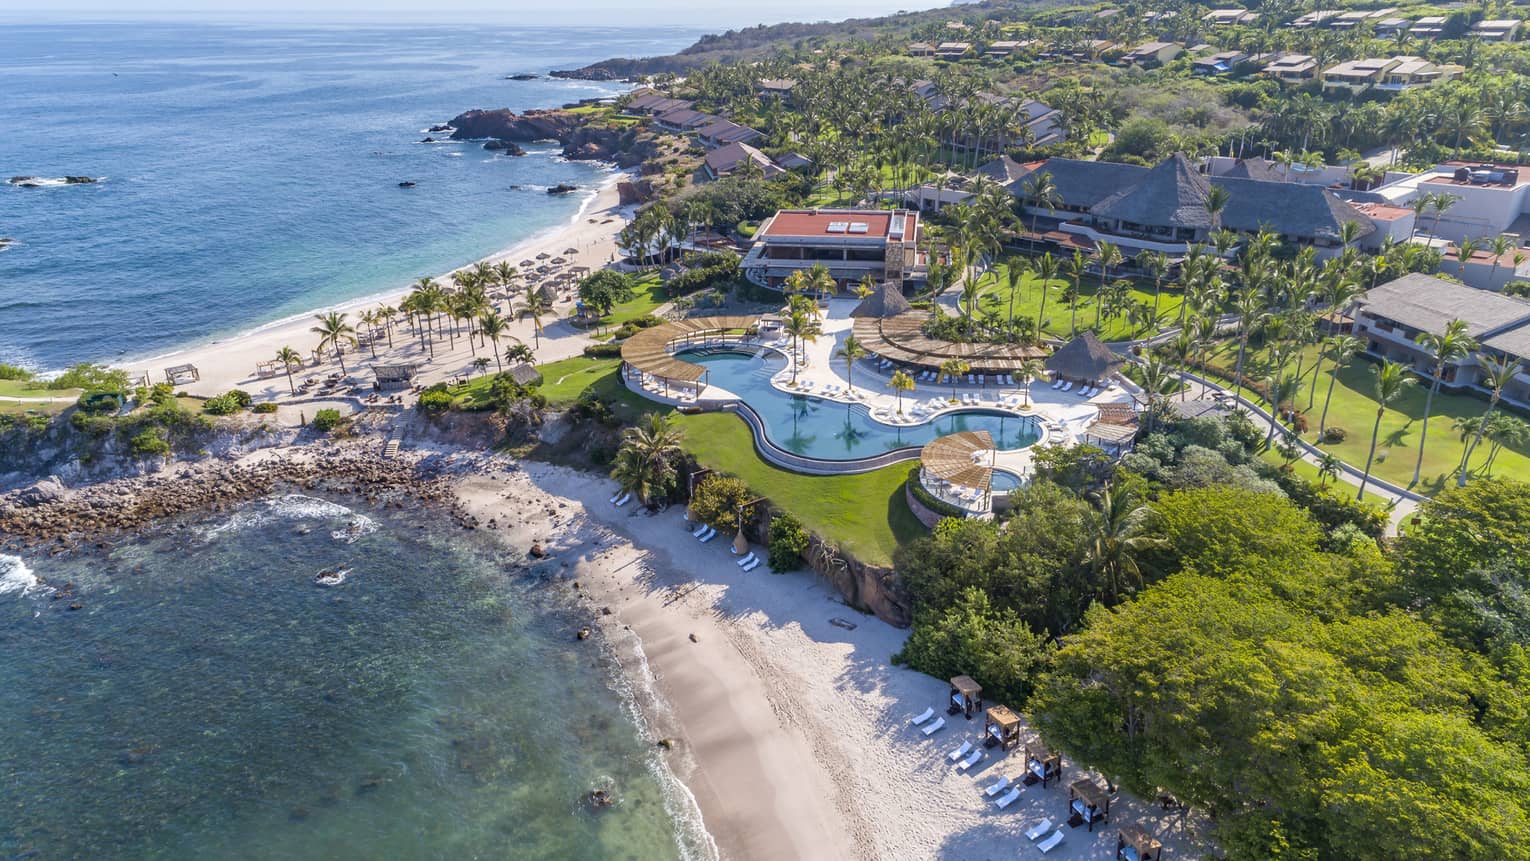 An aerial view of a beach shore with a large property on it with an outdoor pool.